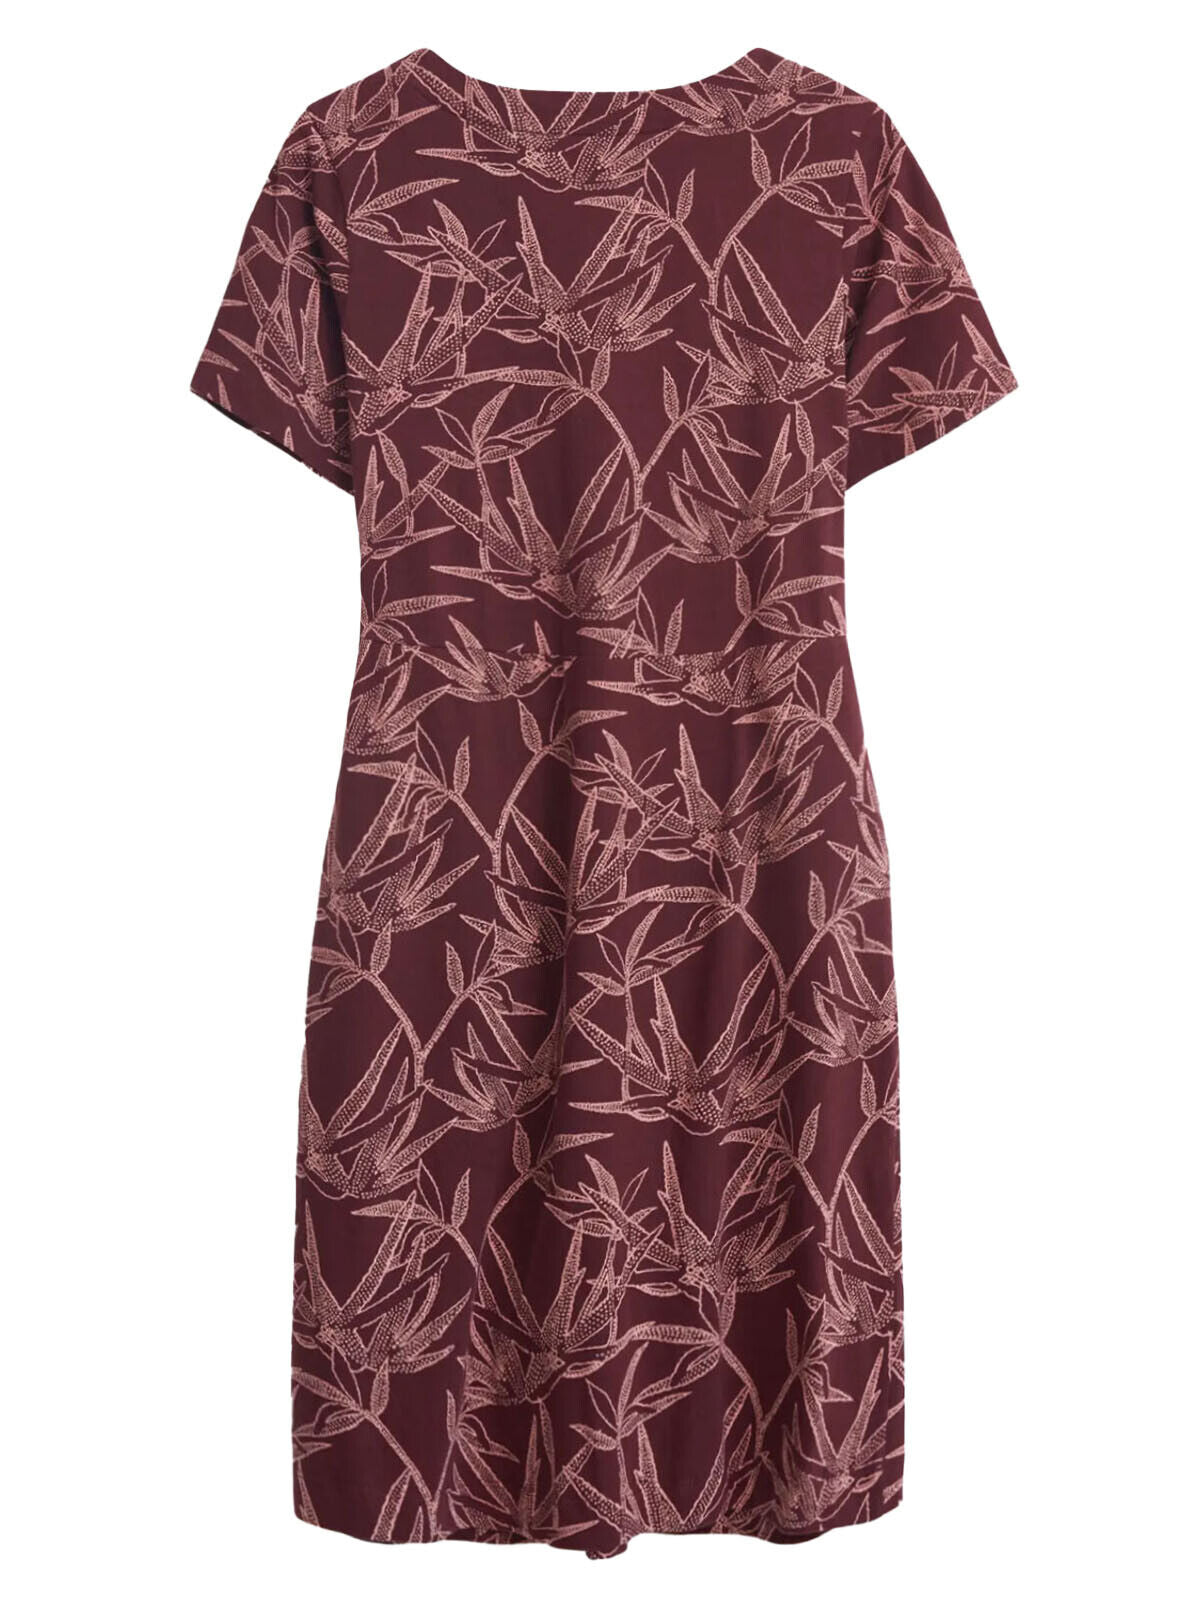 EX WHITE STUFF Ruby Dress Brown in Sizes 8, 10, 12, 14, 16, 18, 20, 22 RRP £55